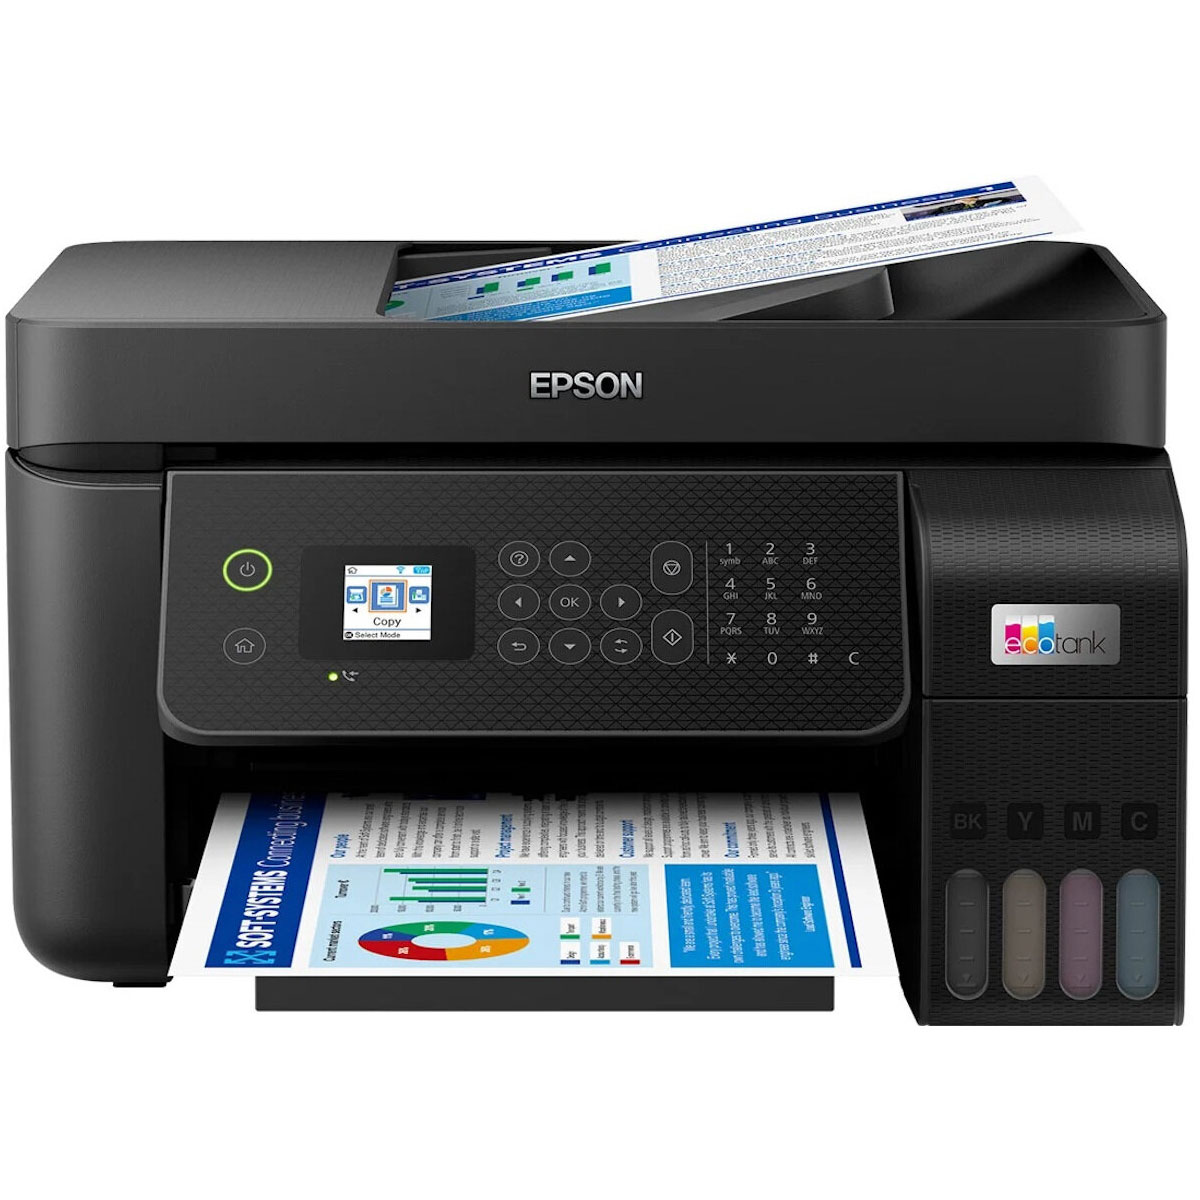 Epson Eco Tank L5290 Wi Fi All In One With Adf Ink Tank Printer Evtech Digital Solutions 5346